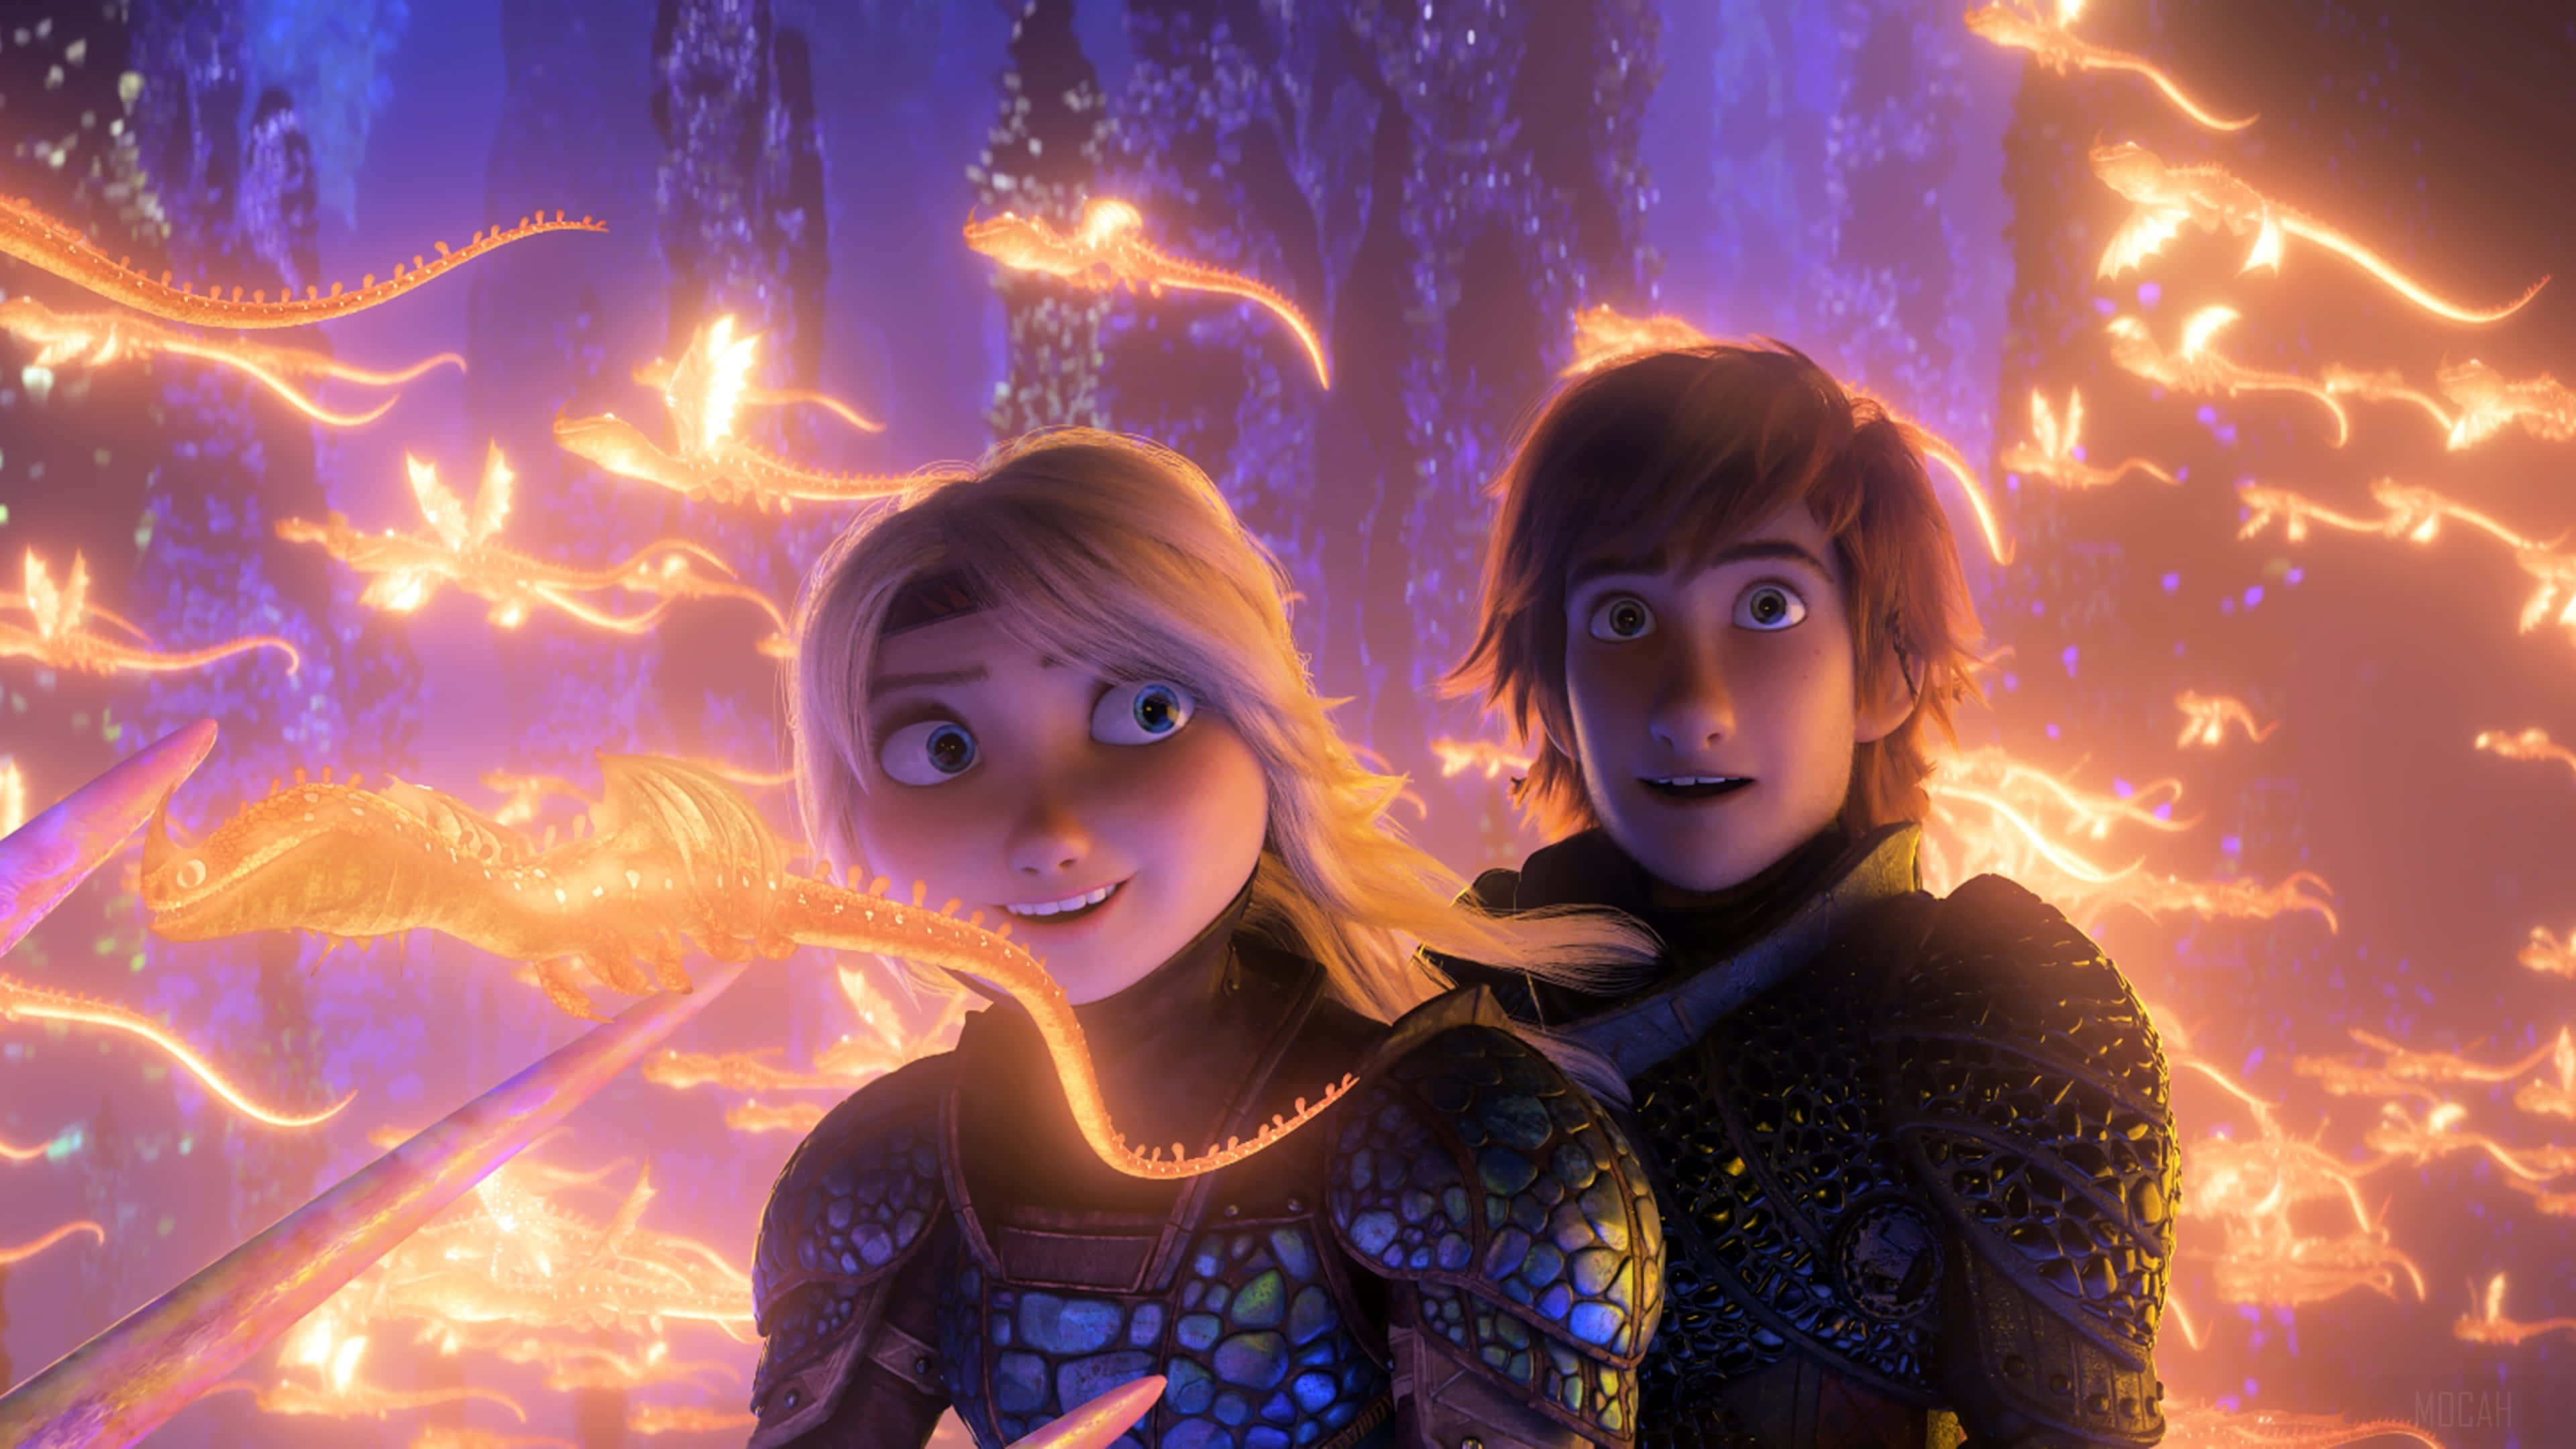 Explore The World With Toothless and Hiccup in How To Train Your Dragon 4k Wallpaper